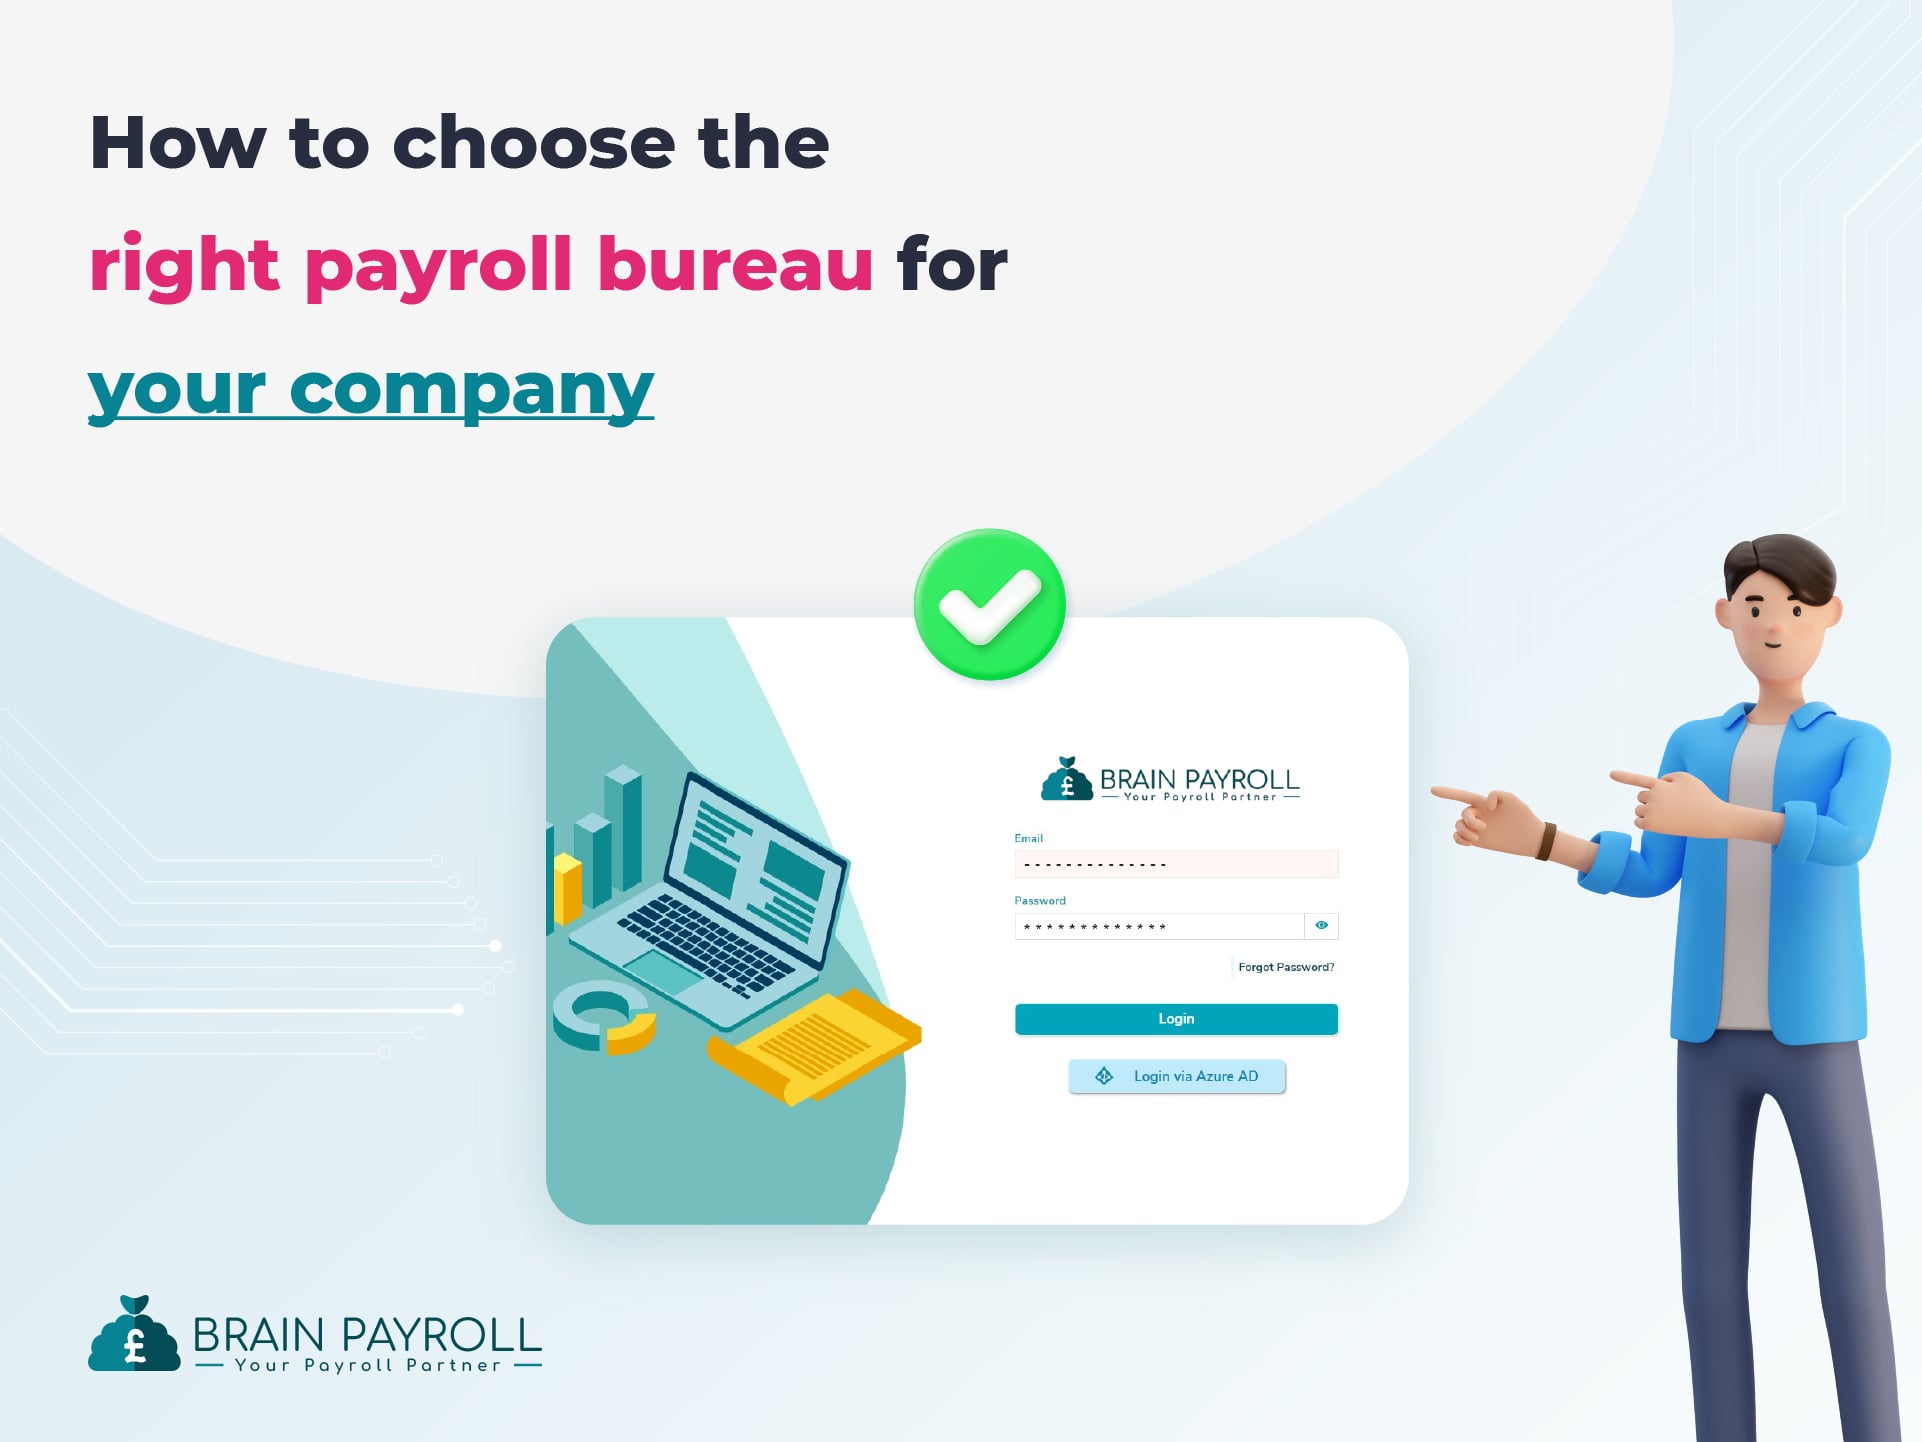 How To Choose The Right Payroll Bureau For Your Company